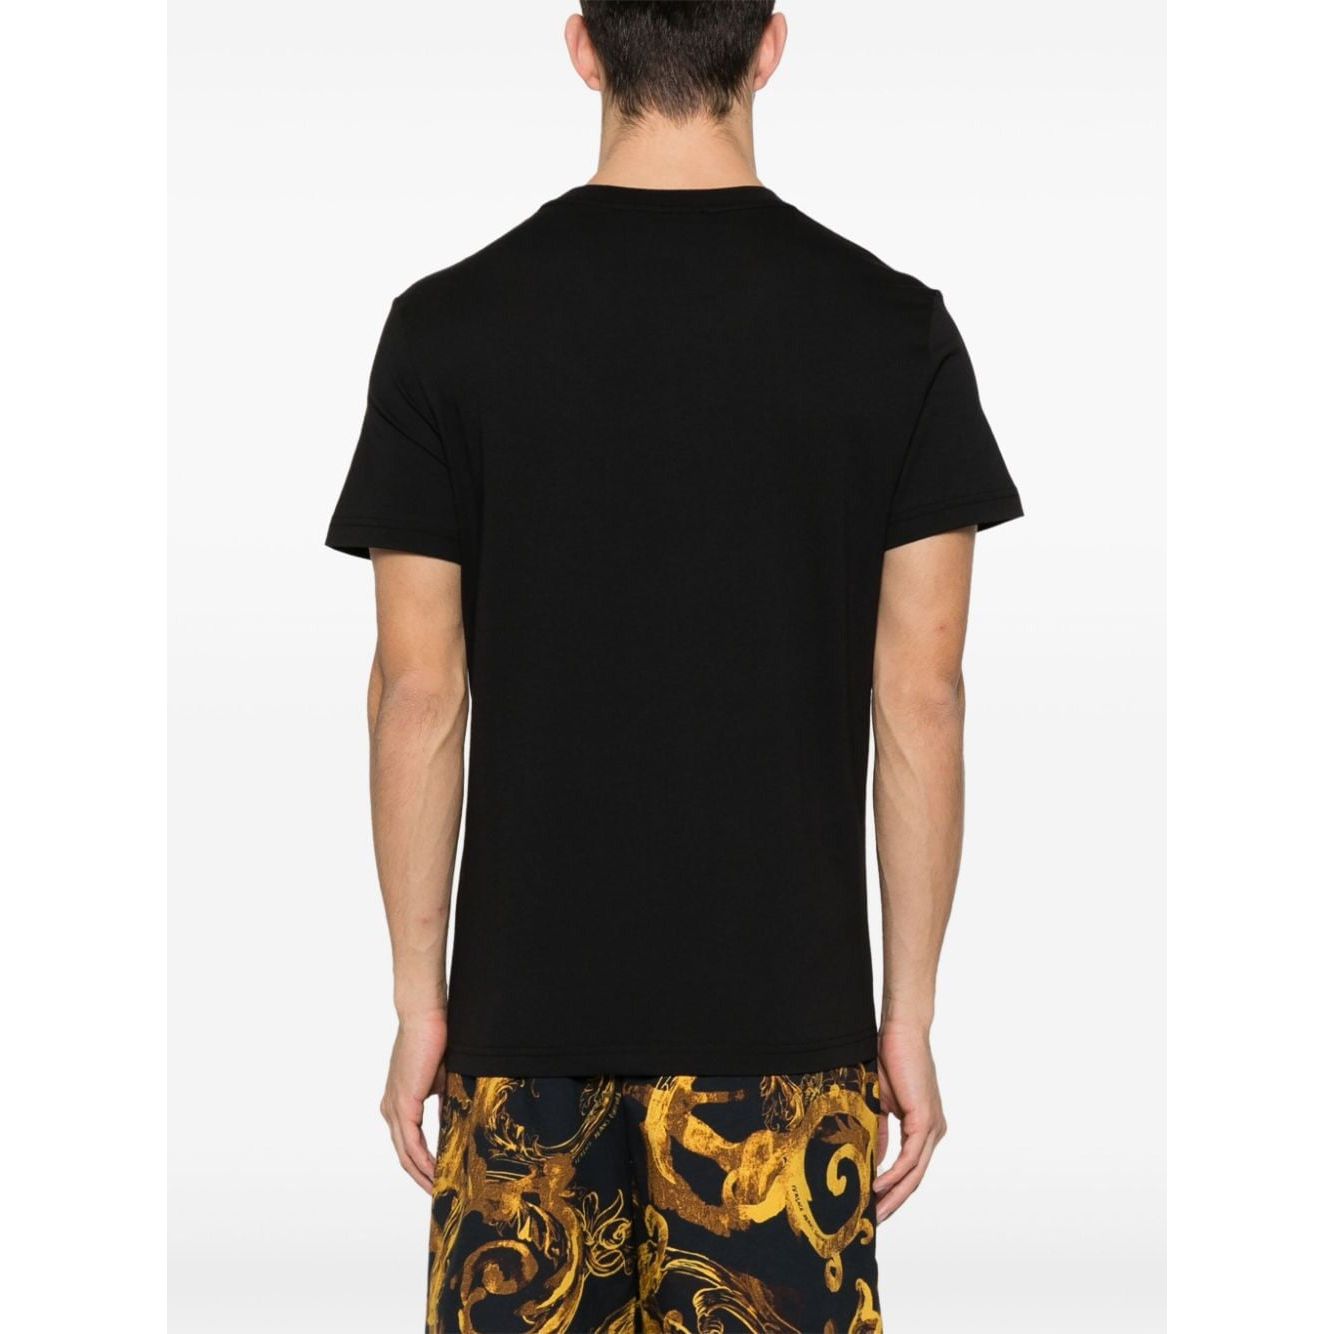 VERSACE JEANS COUTURE SHORT SLEEVE T-SHIRT - Yooto